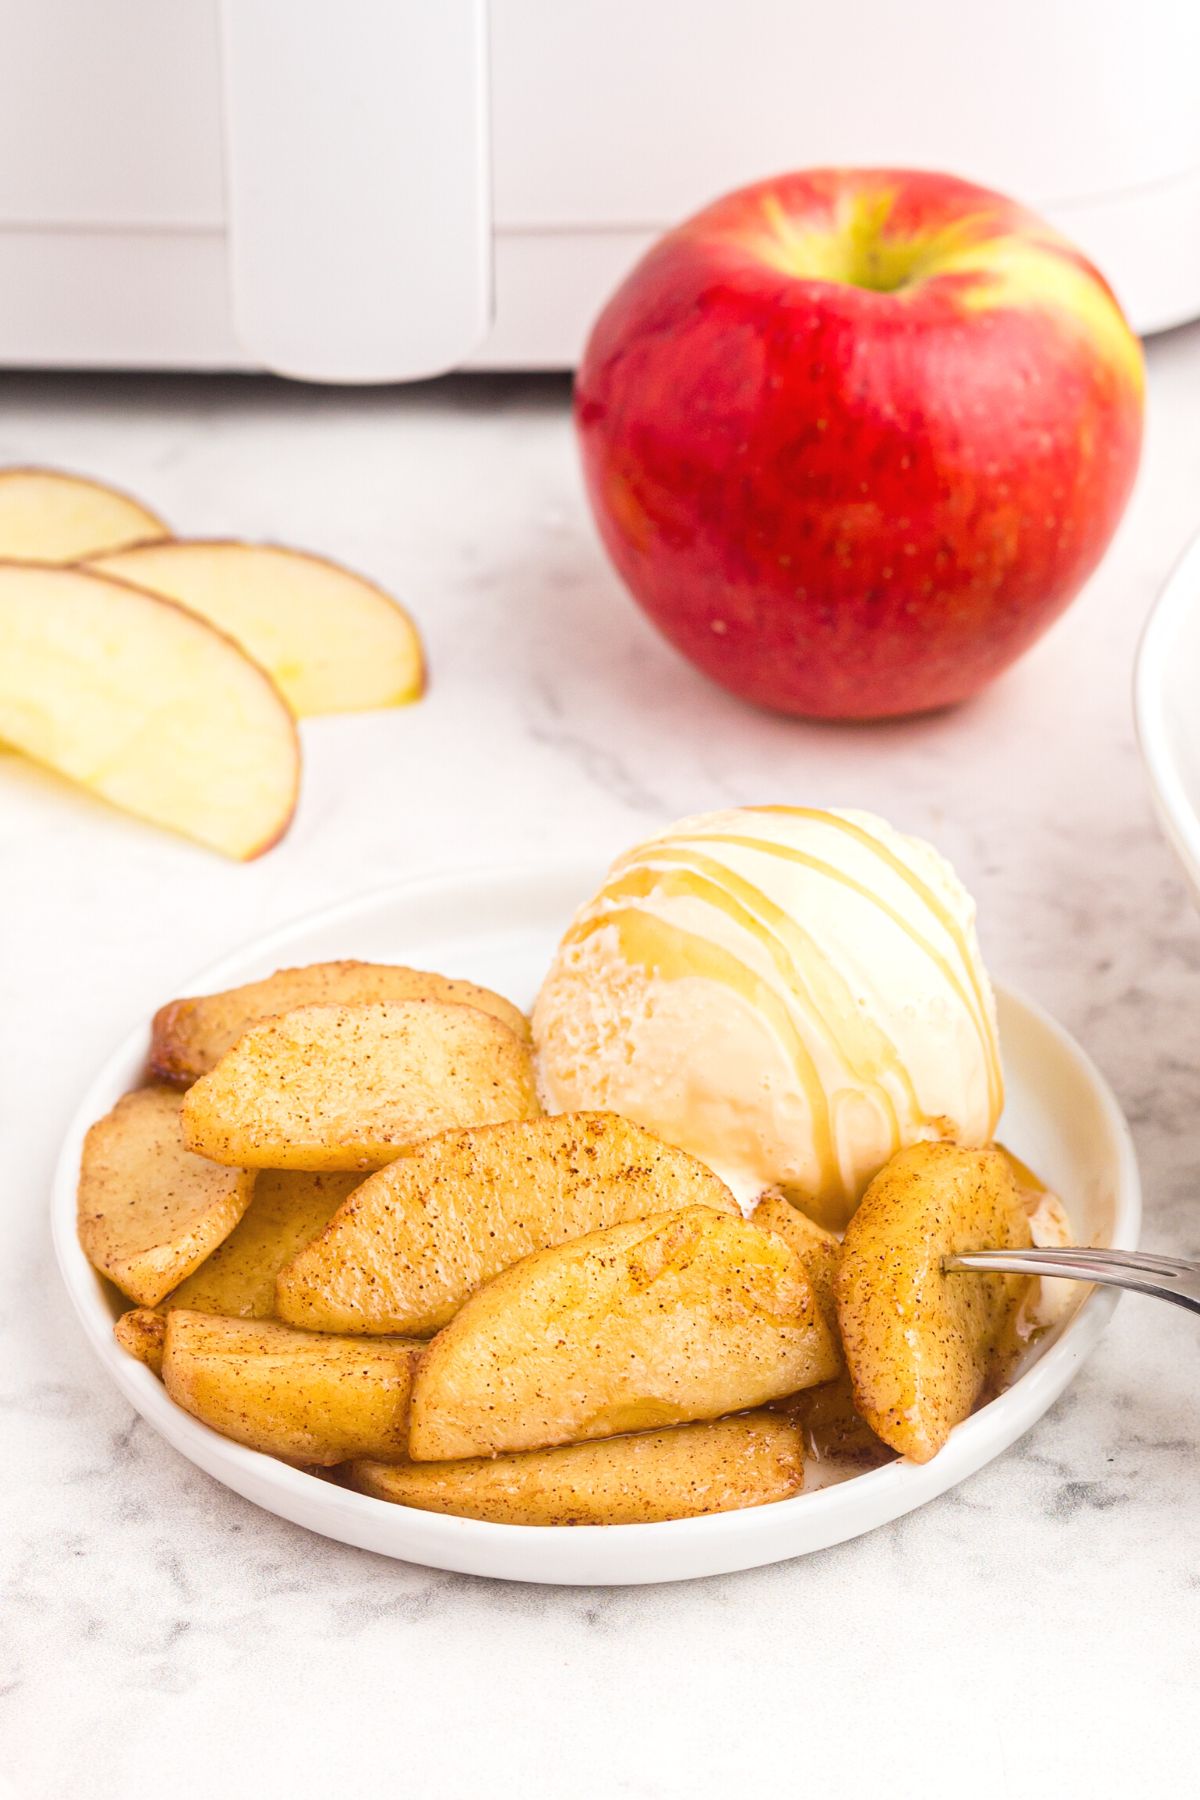 Sliced apples cooked in the air fryer on a plate with a scoop of ice cream.